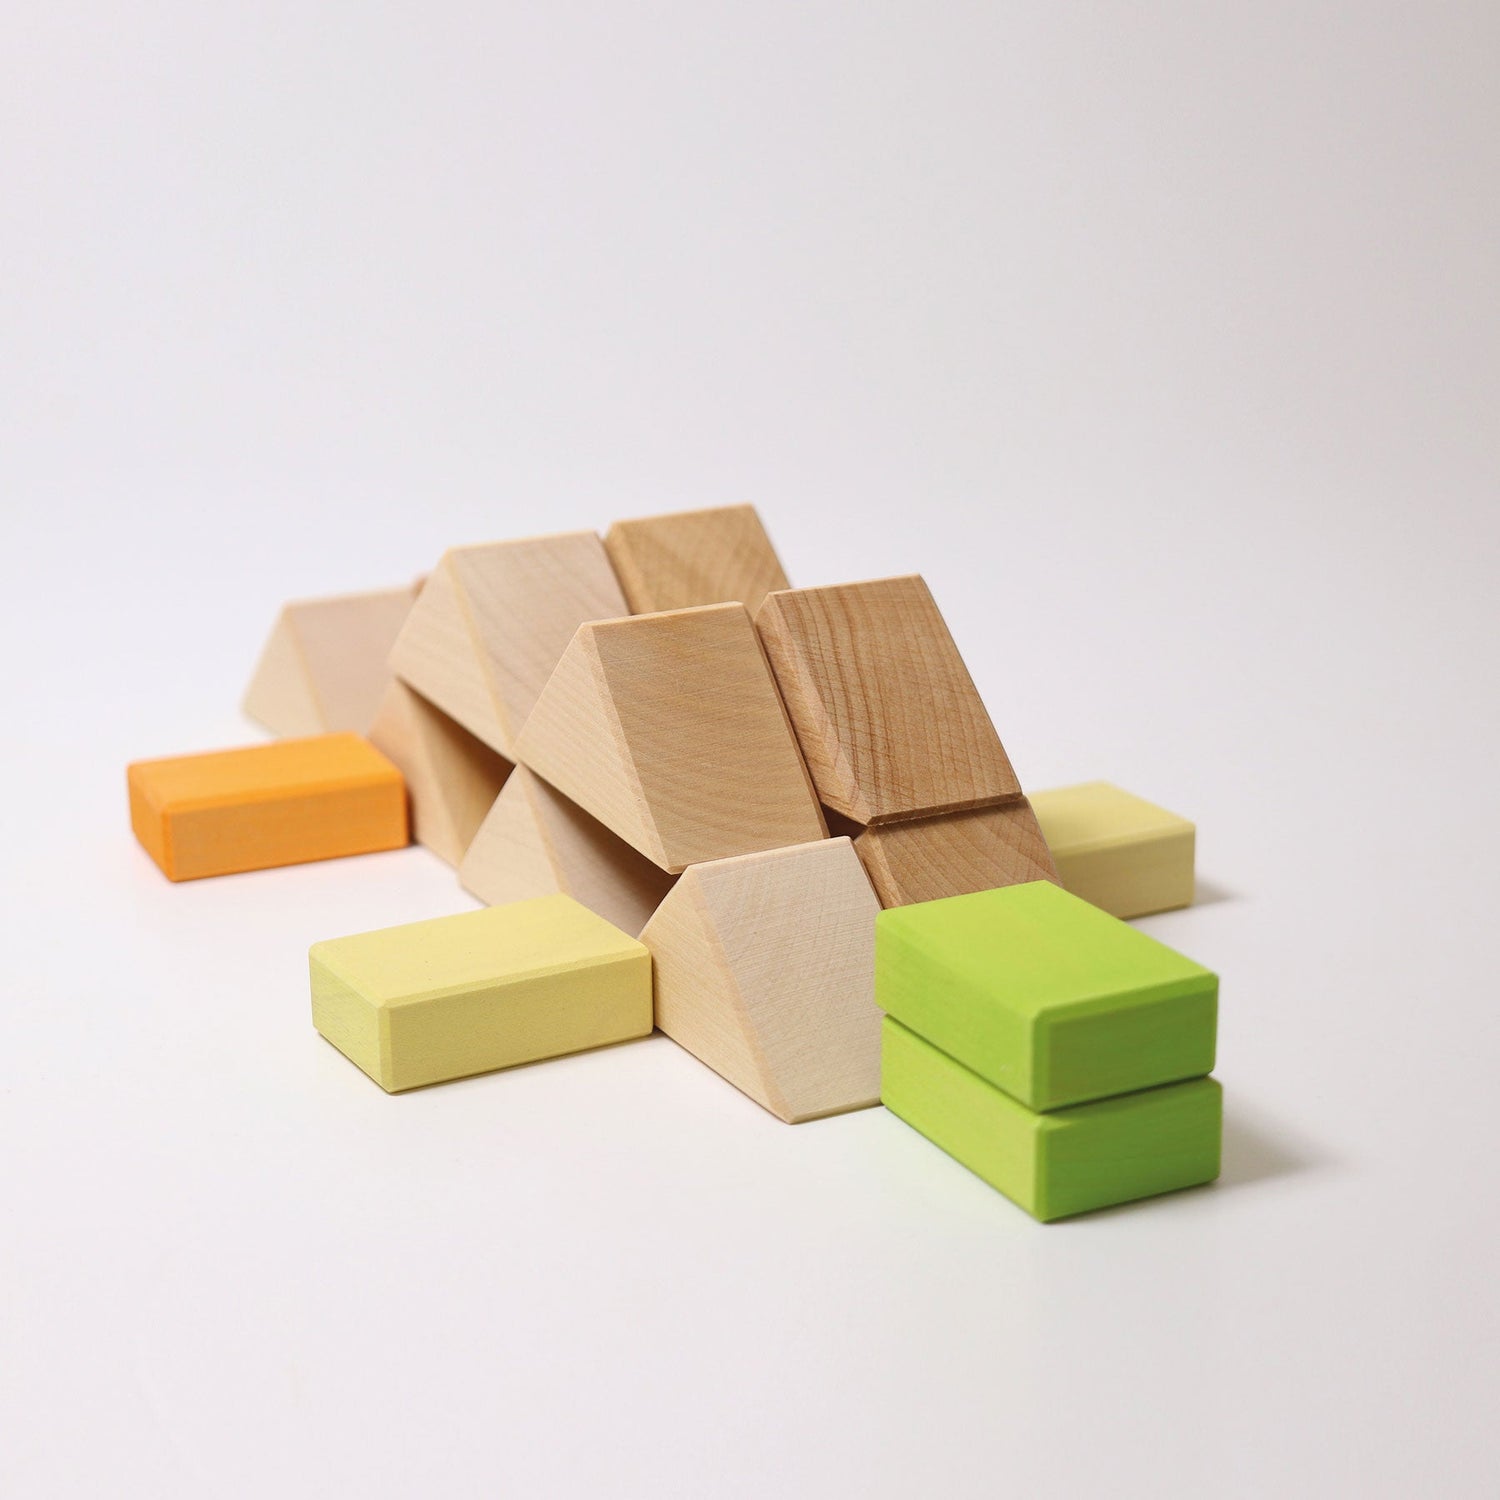 GRIMM'S | BUILDING SET PASTEL DUO by GRIMM'S WOODEN TOYS - The Playful Collective